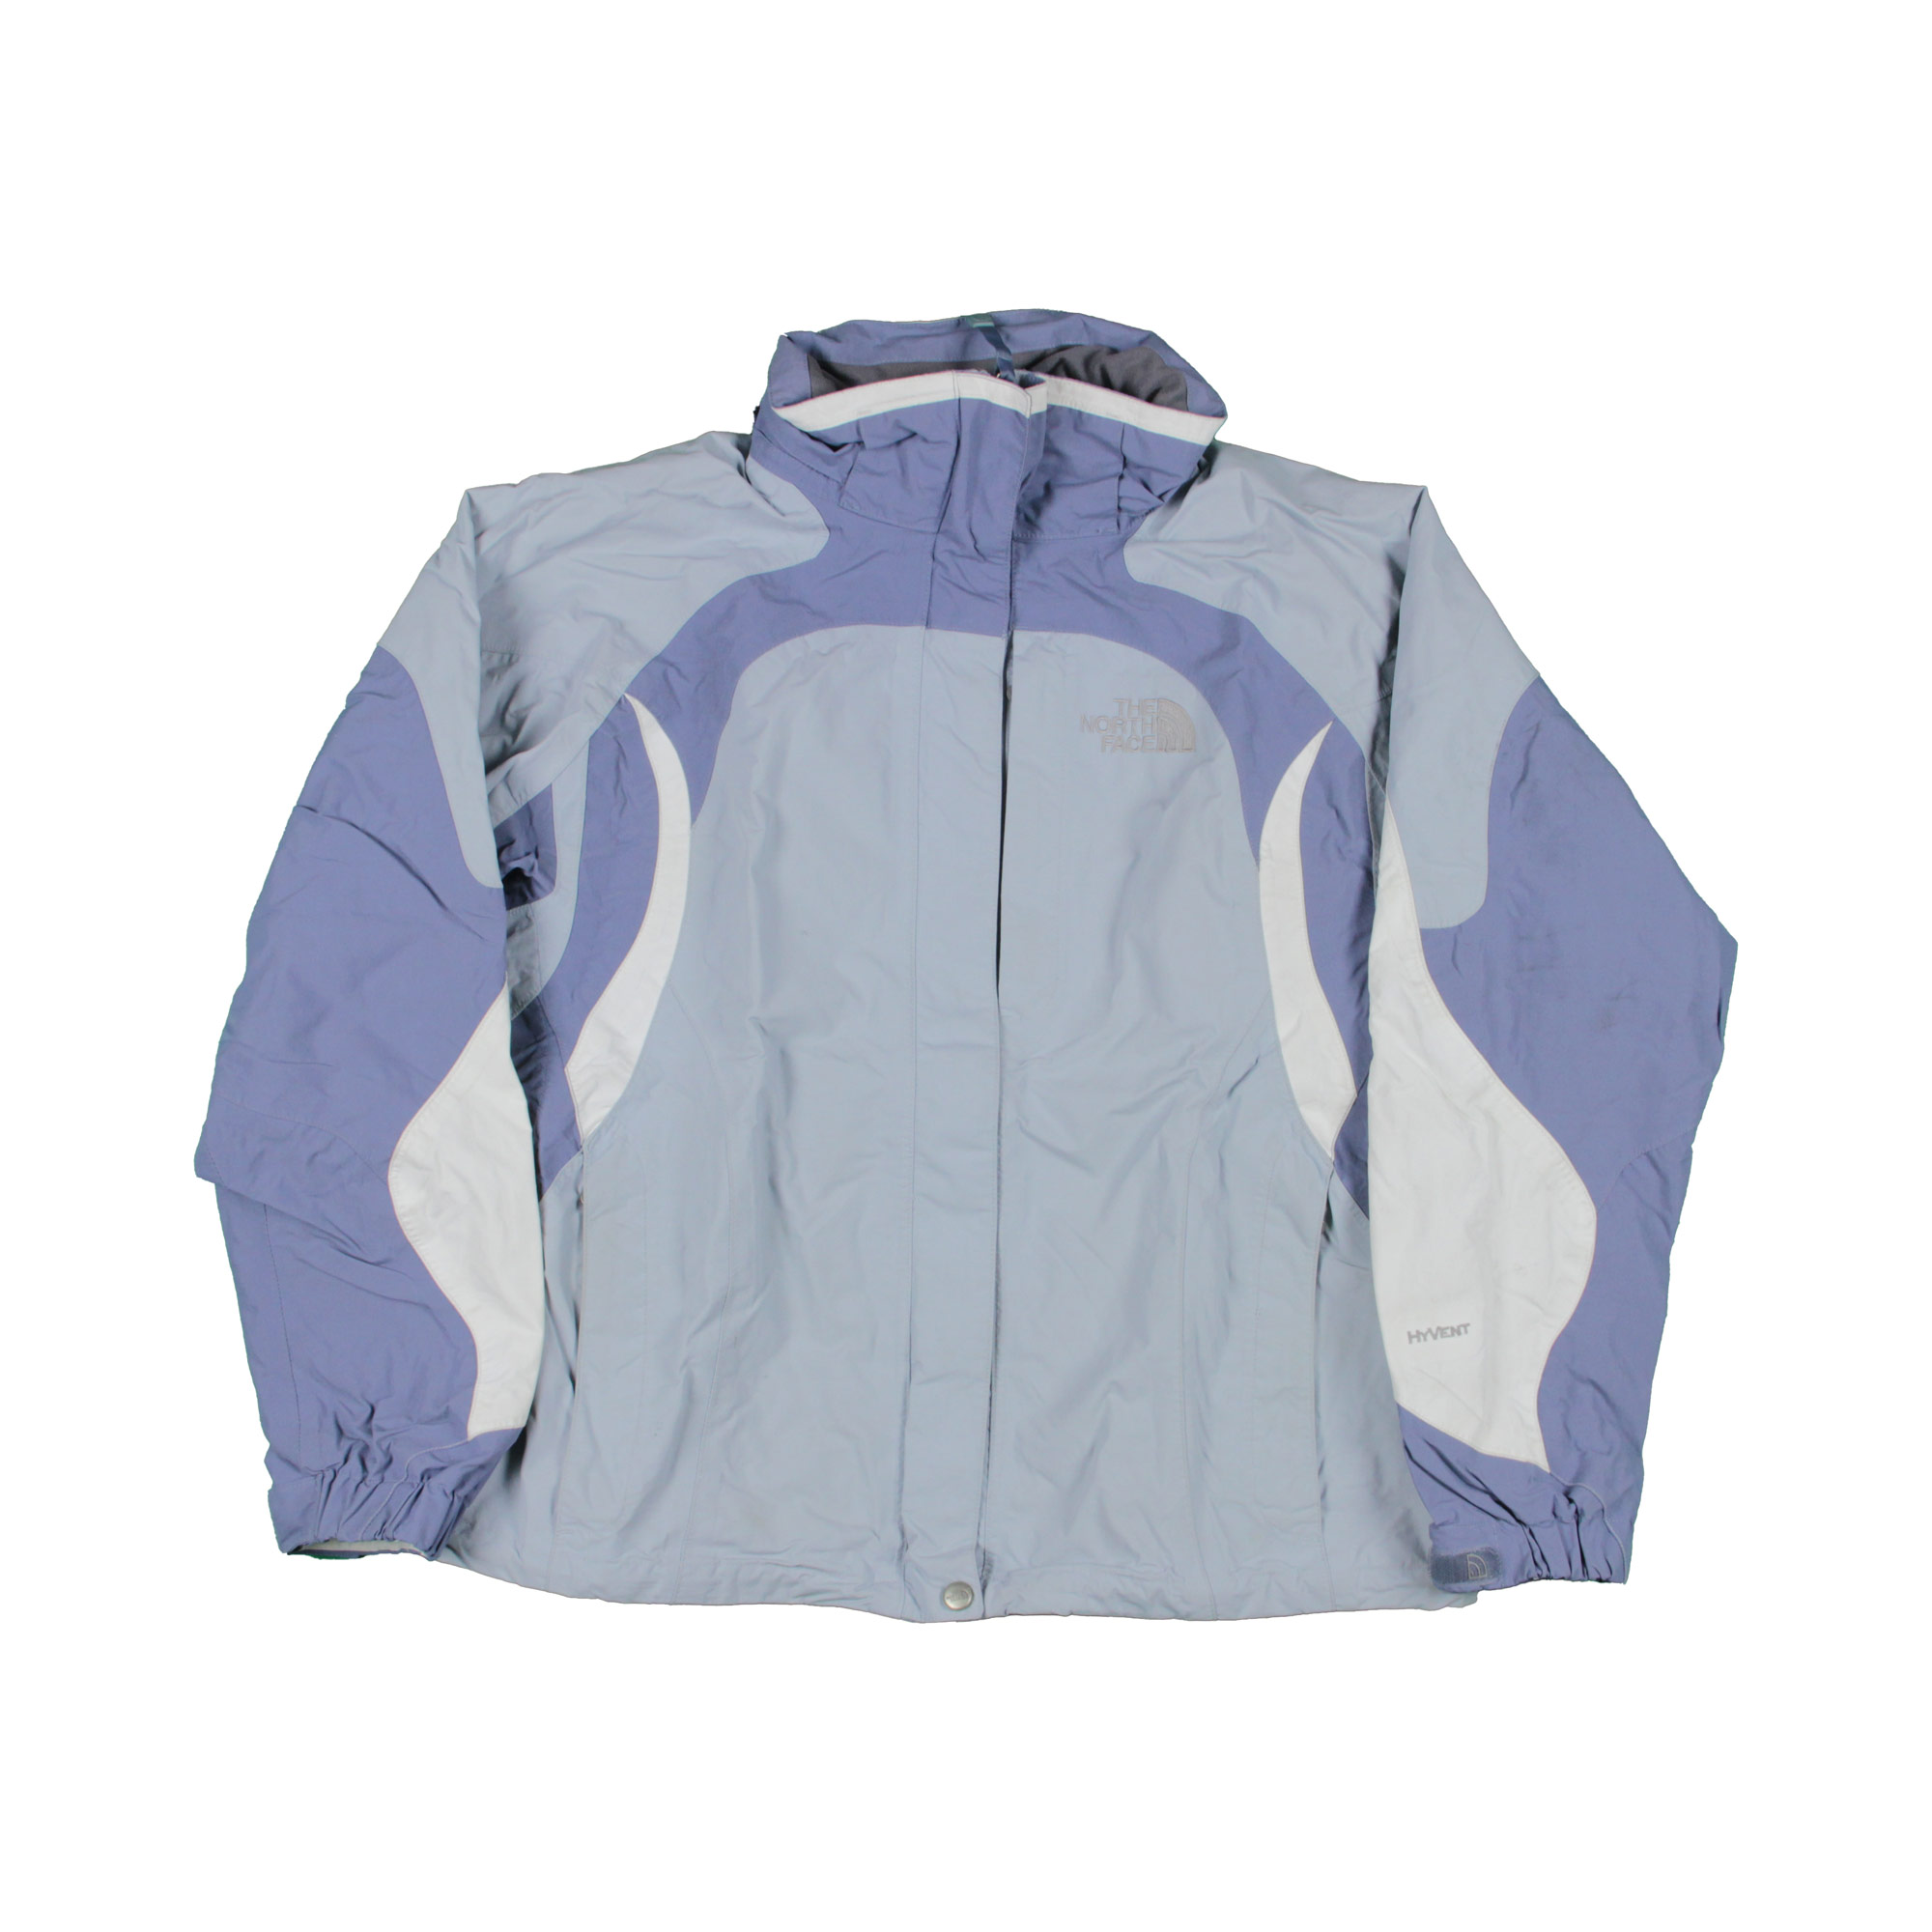 The North Face Vintage Jacket - Women's M